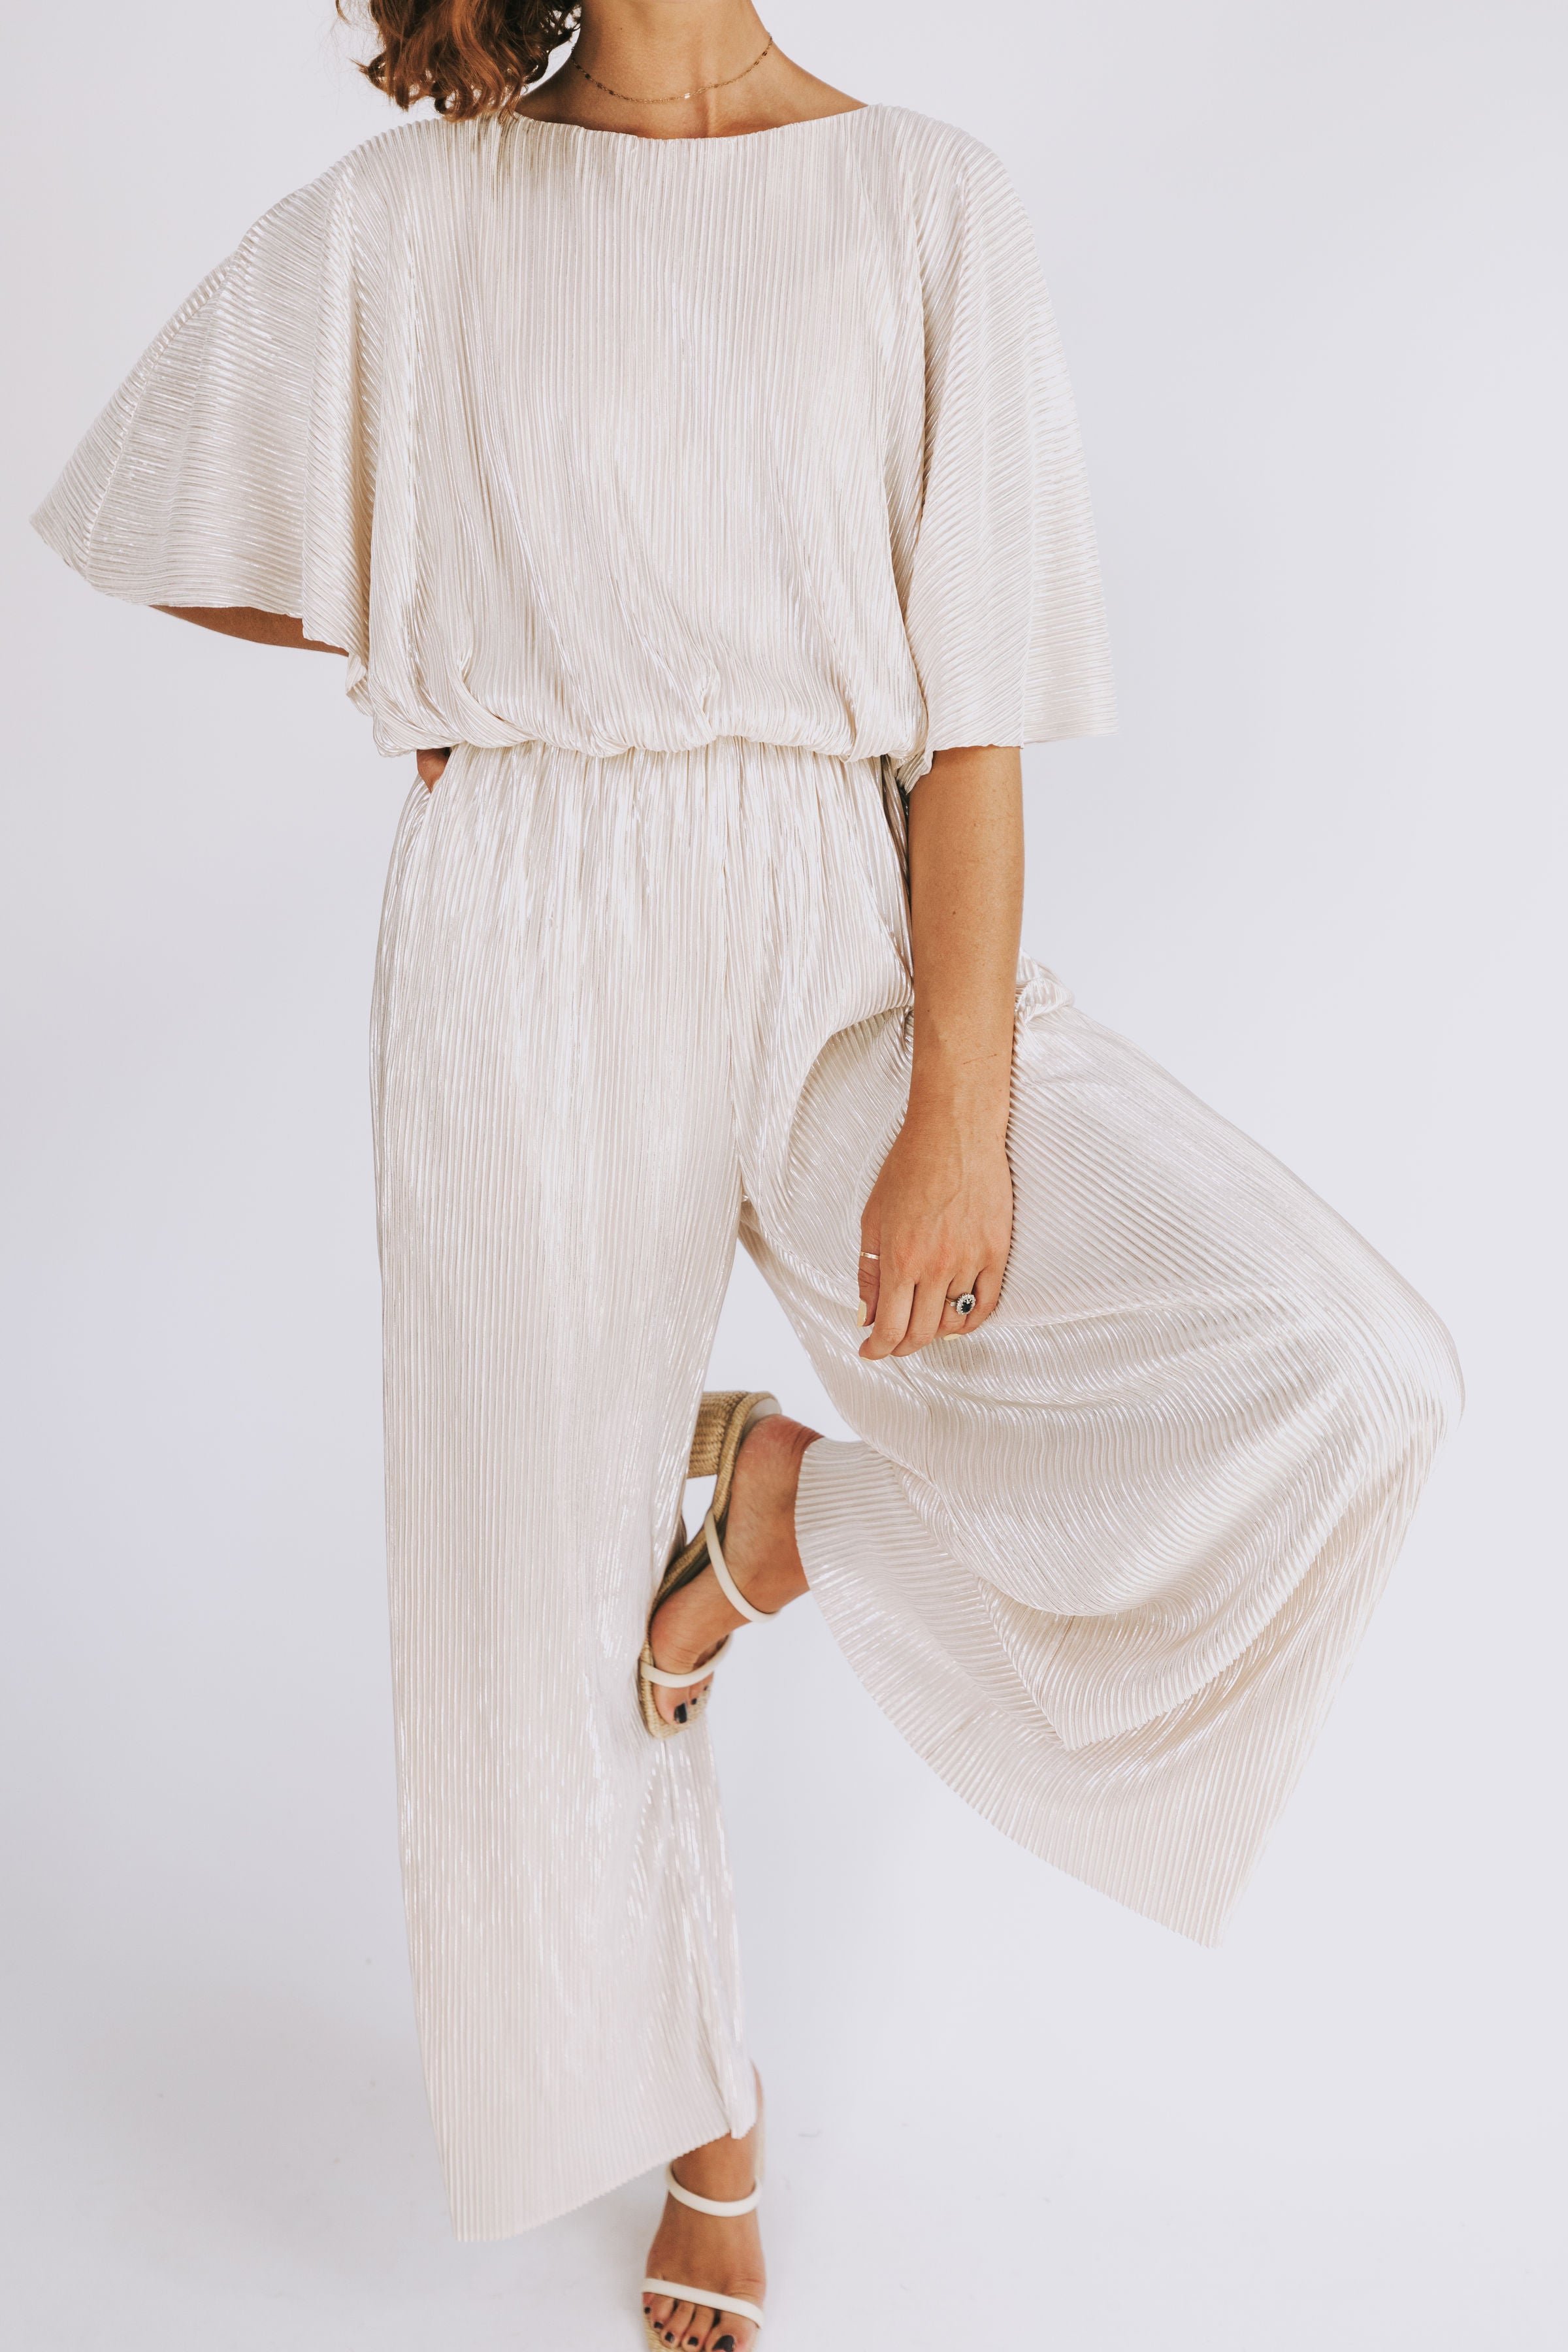 Heavenly Wishes Jumpsuit